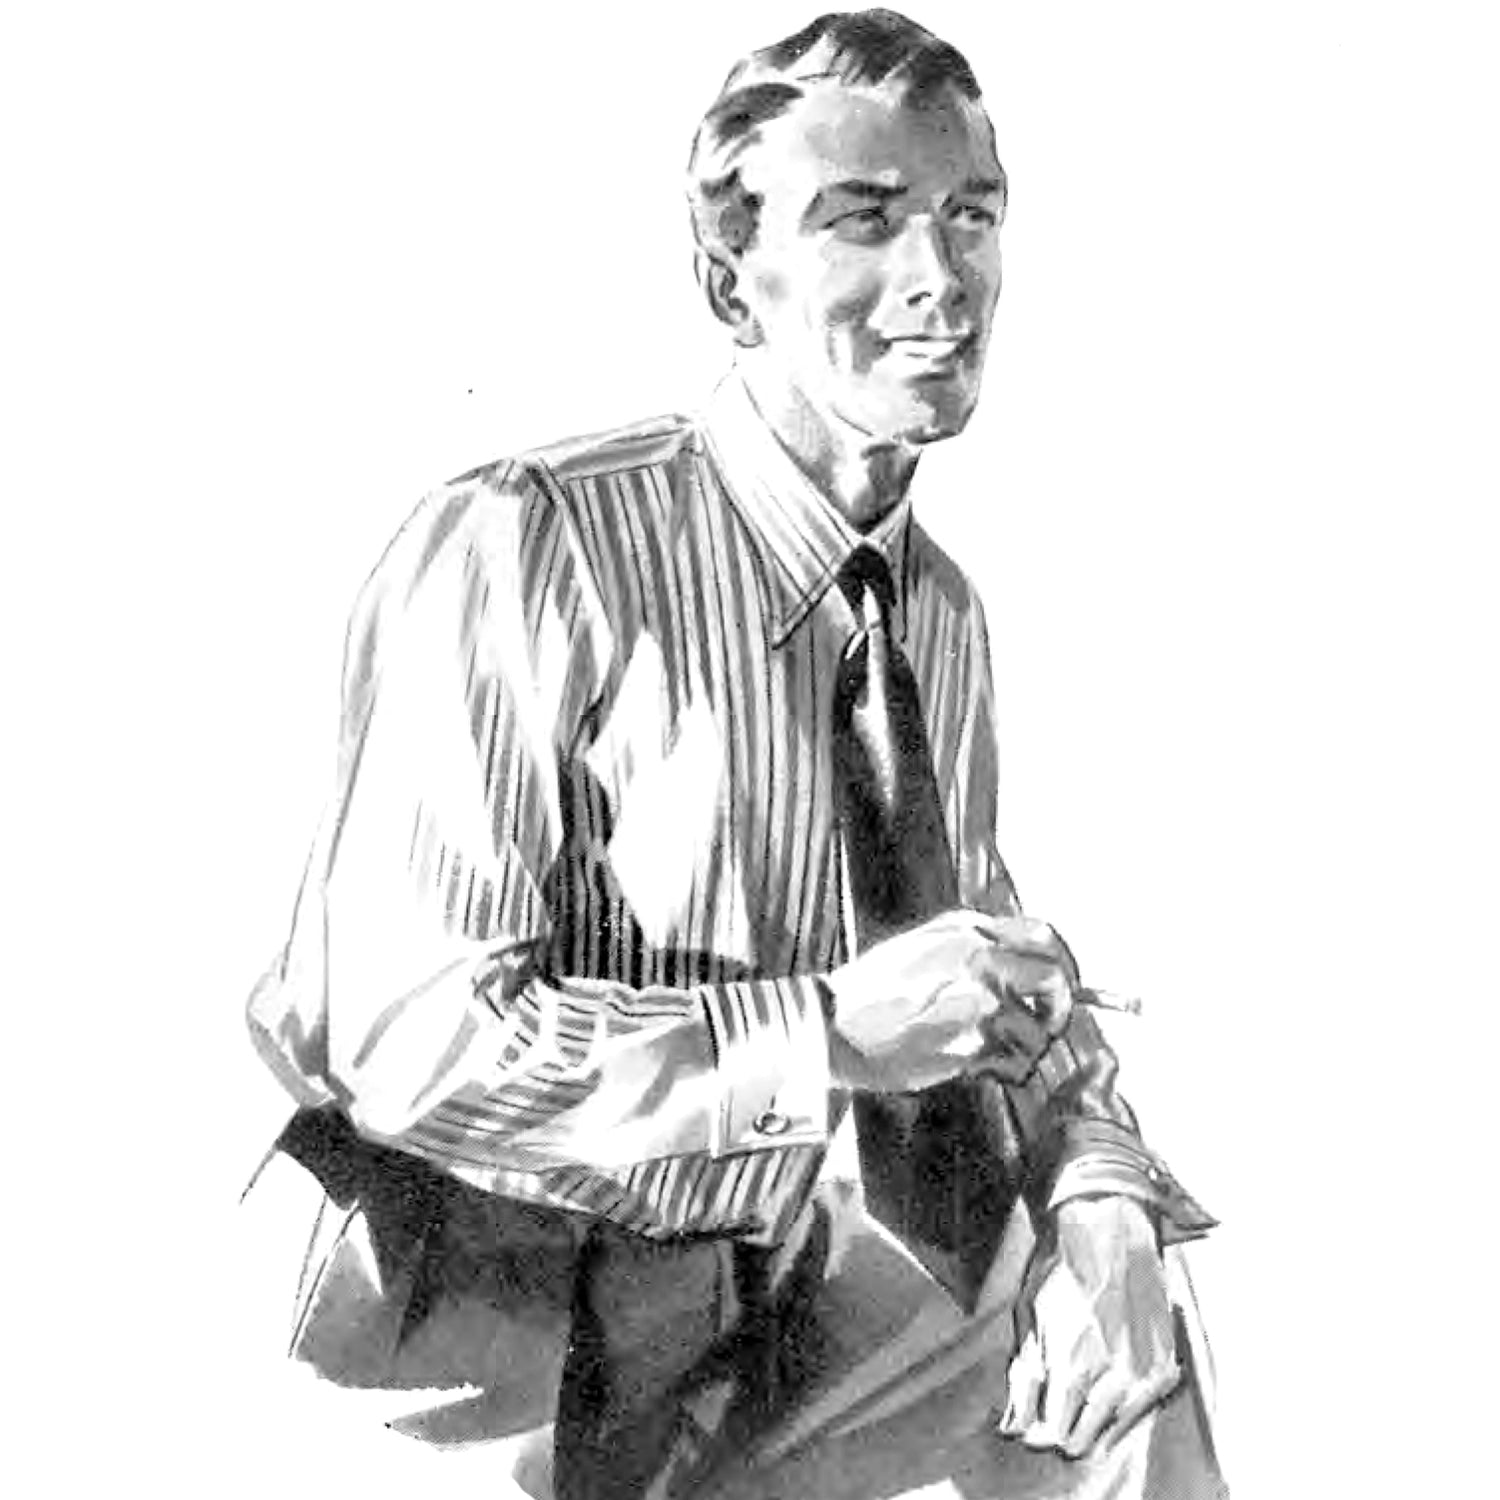 Man wearing striped shirt and tie.